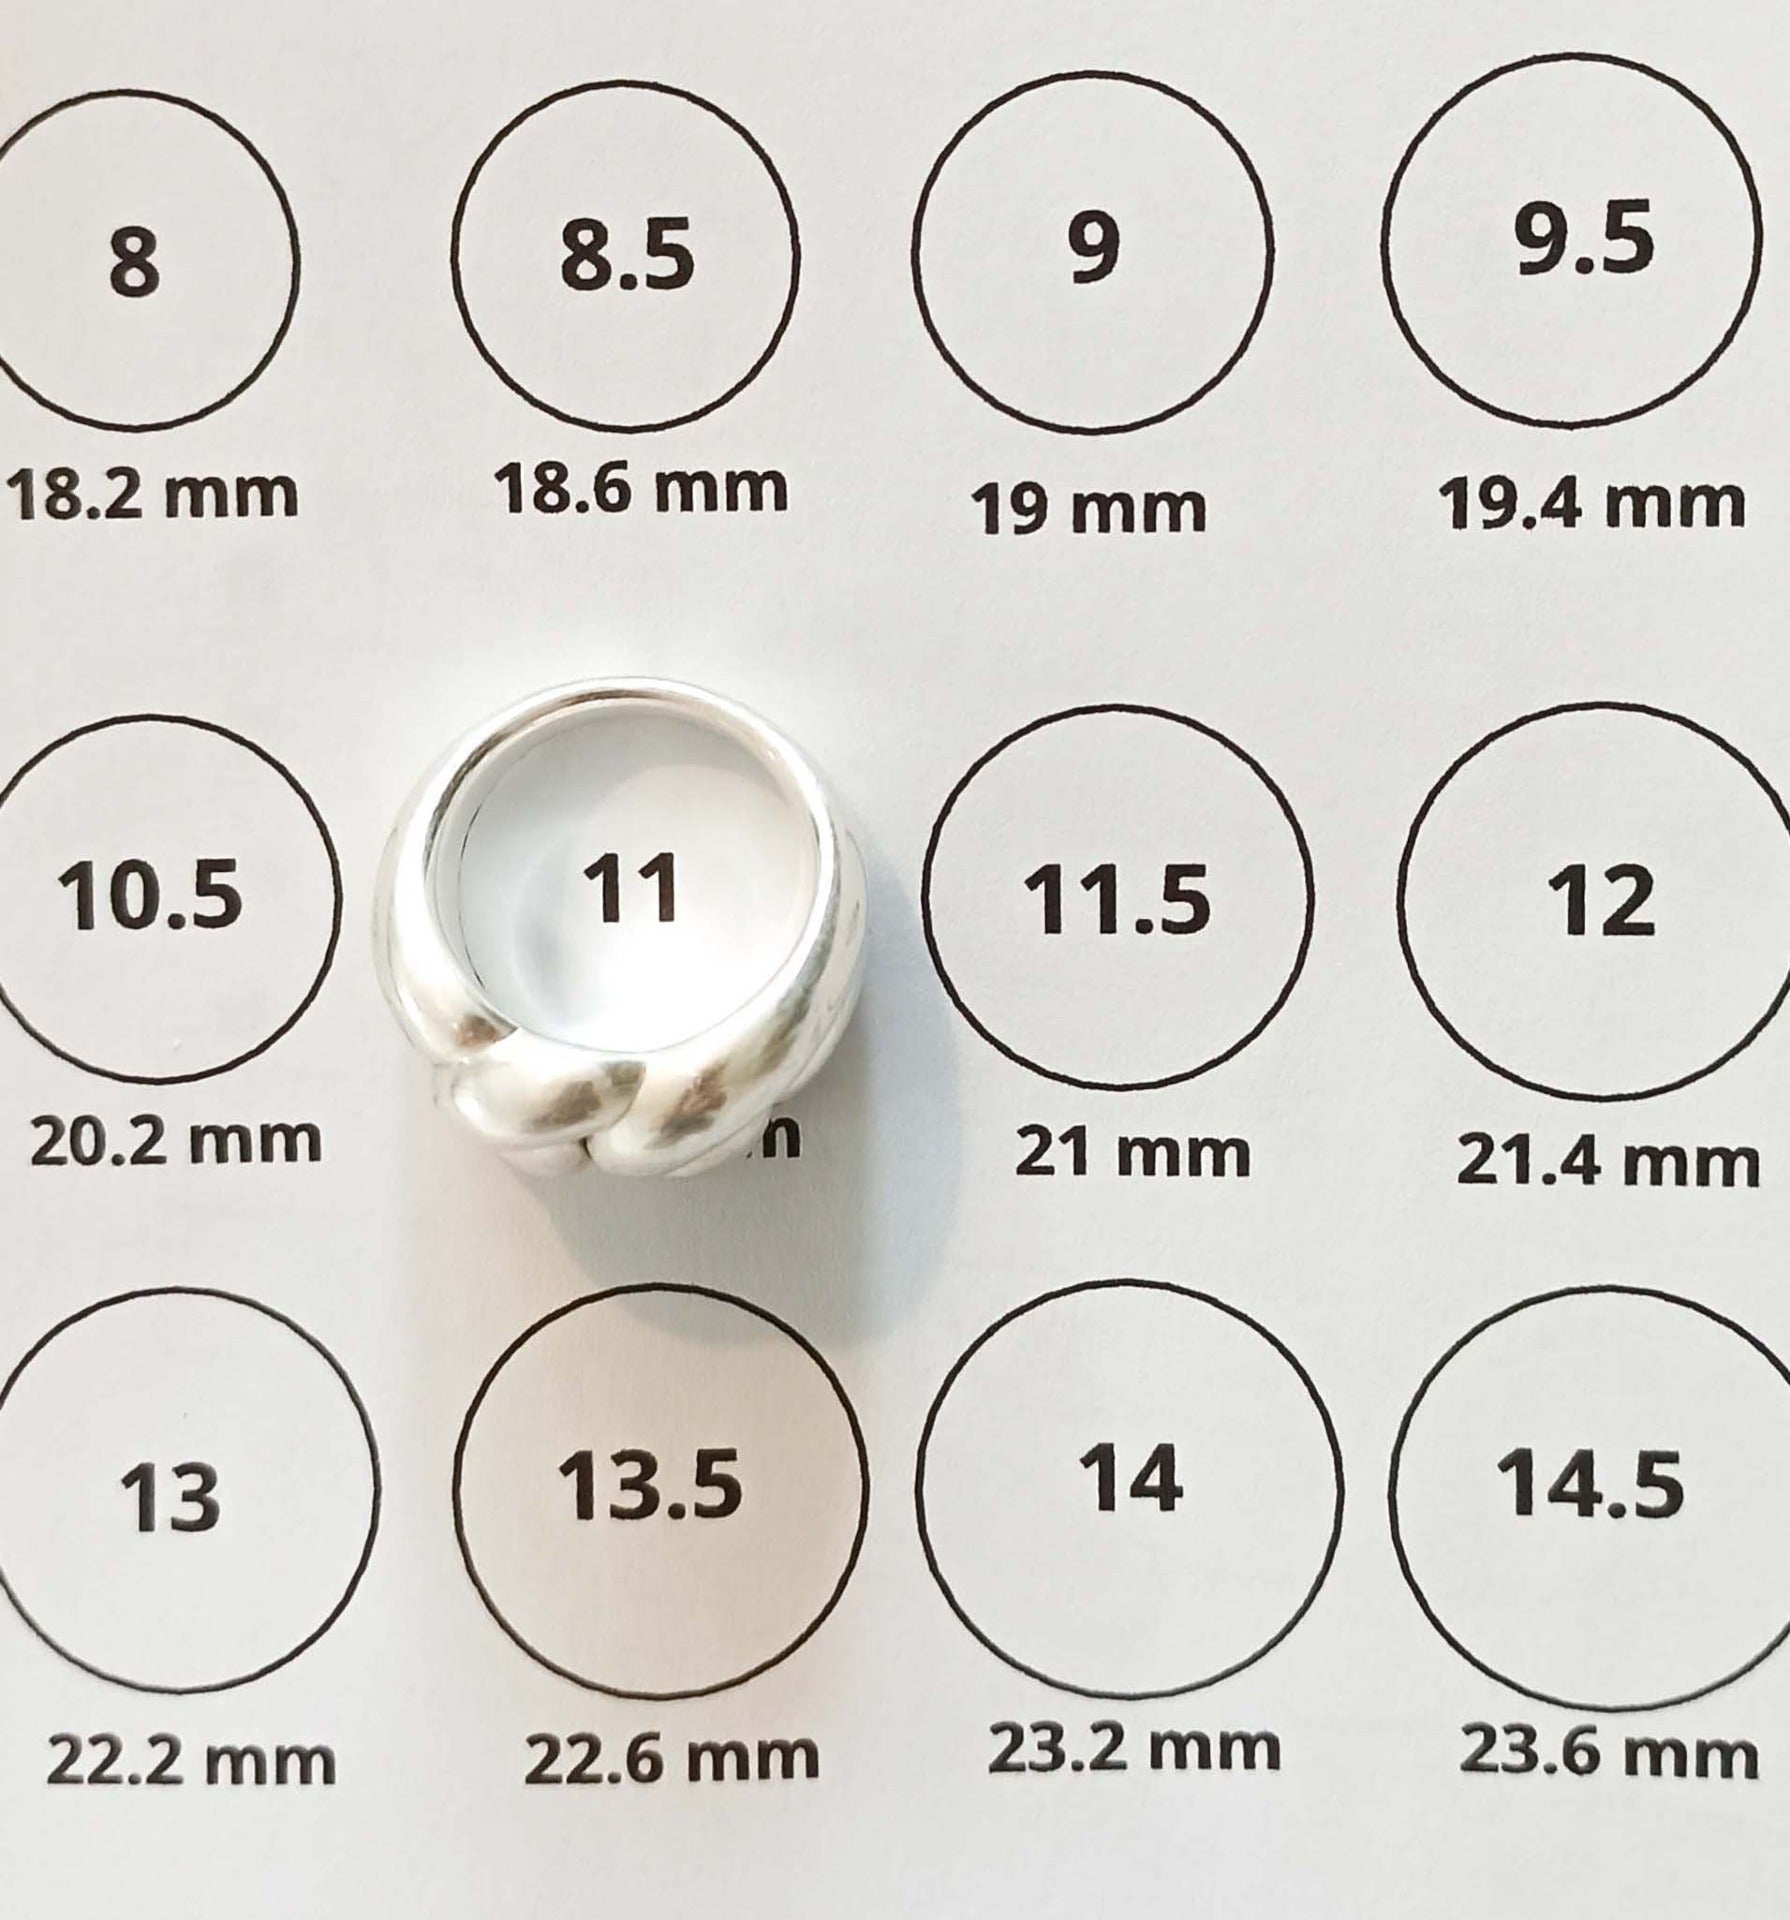 How can I measure my ring size at home?